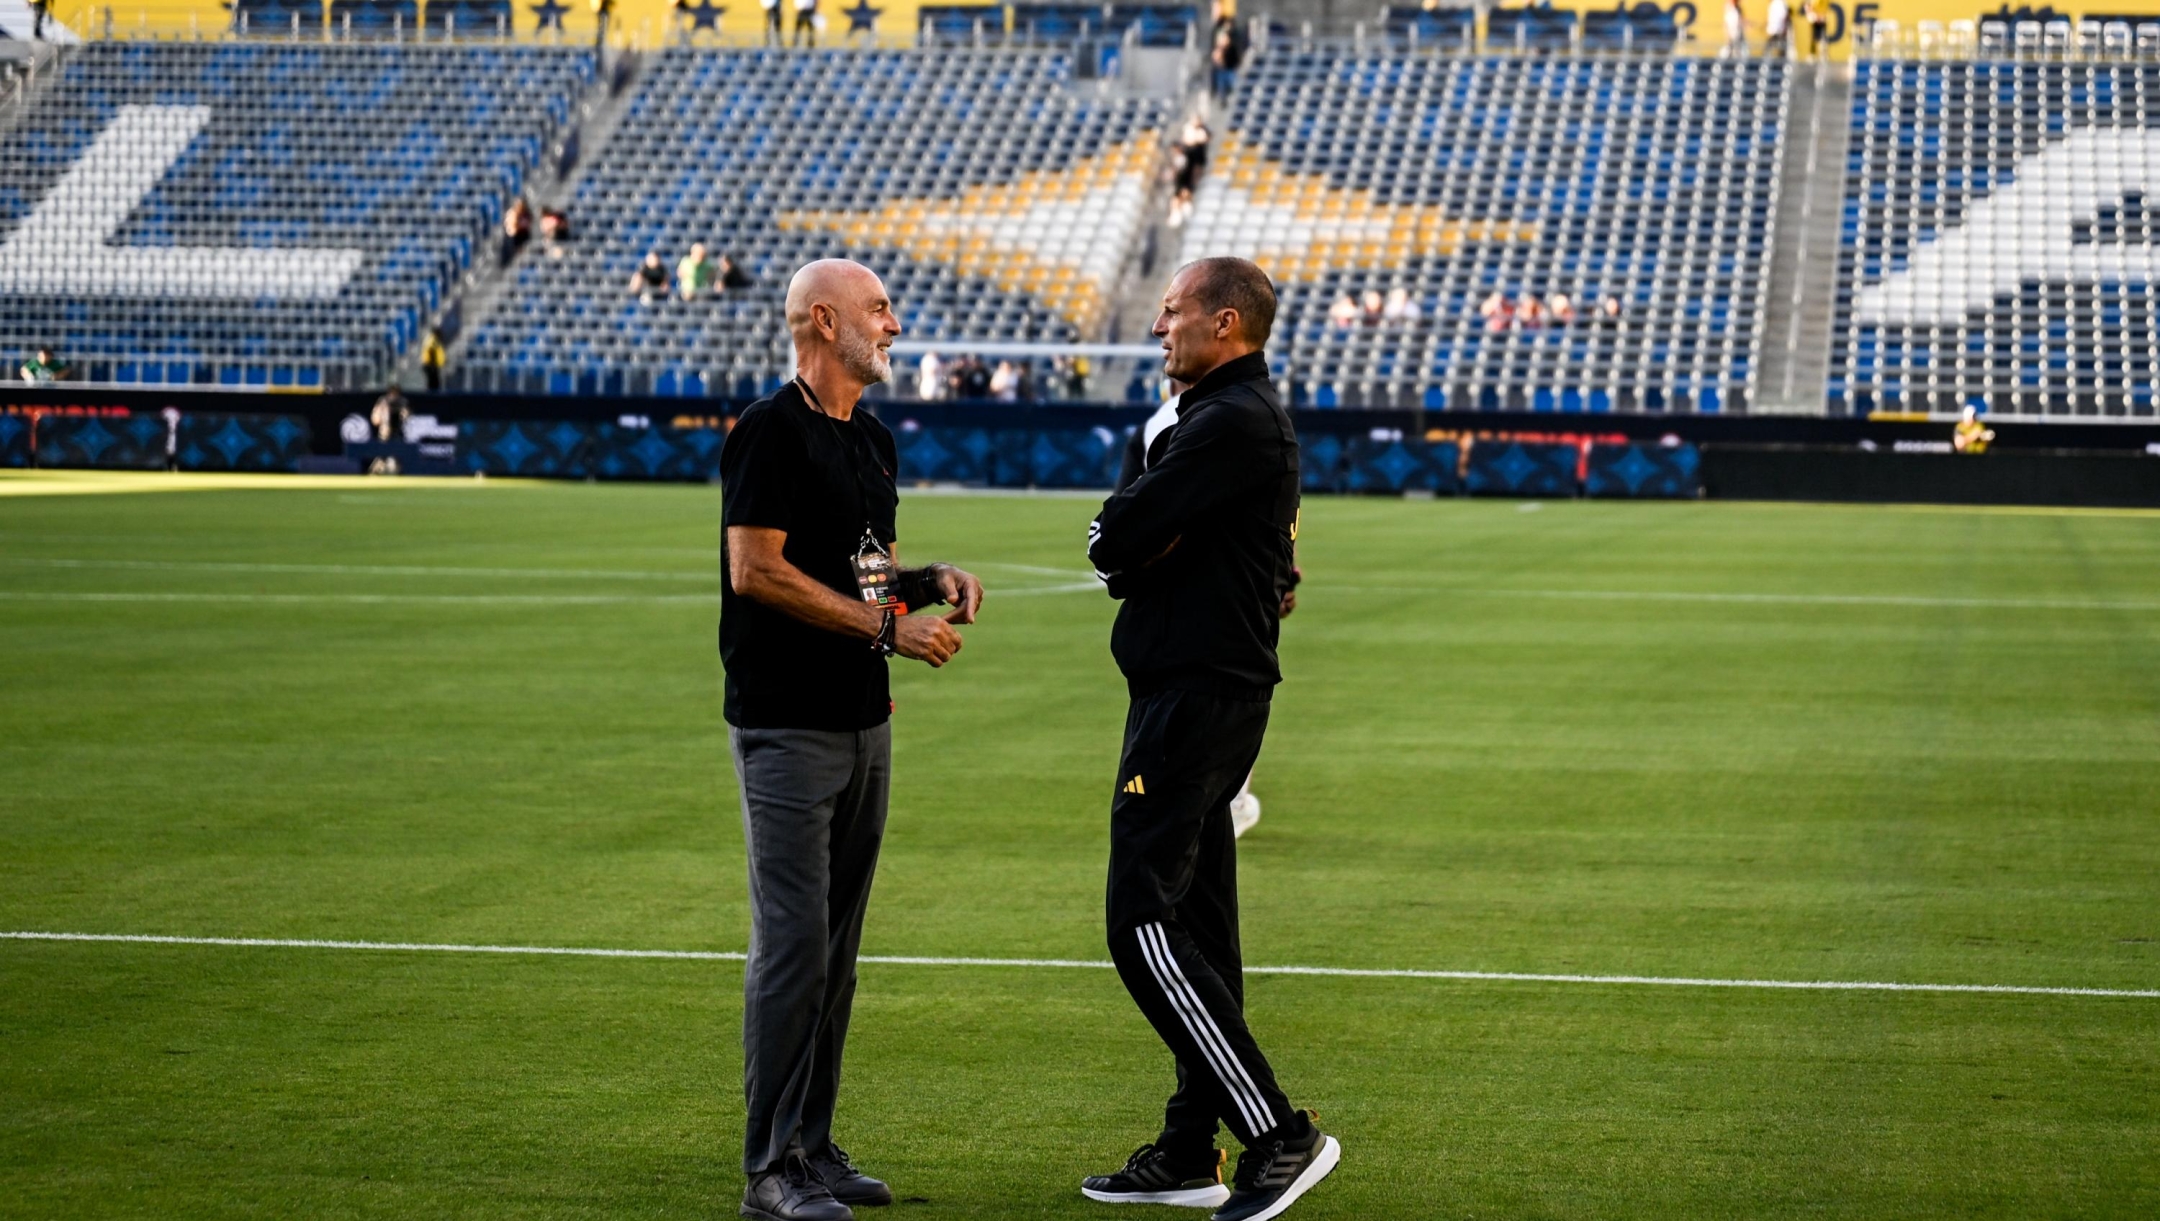 CARSON, CALIFORNIA - JULY 27: Manager Stefano Pioli (L) of Milan talks to Manager Massimiliano Allegri of Juventus before the pre-season friendly match between Juventus and AC Milan at Dignity Health Sports Park on July 27, 2023 in Carson, California. (Photo by Daniele Badolato - Juventus FC/Juventus FC via Getty Images)